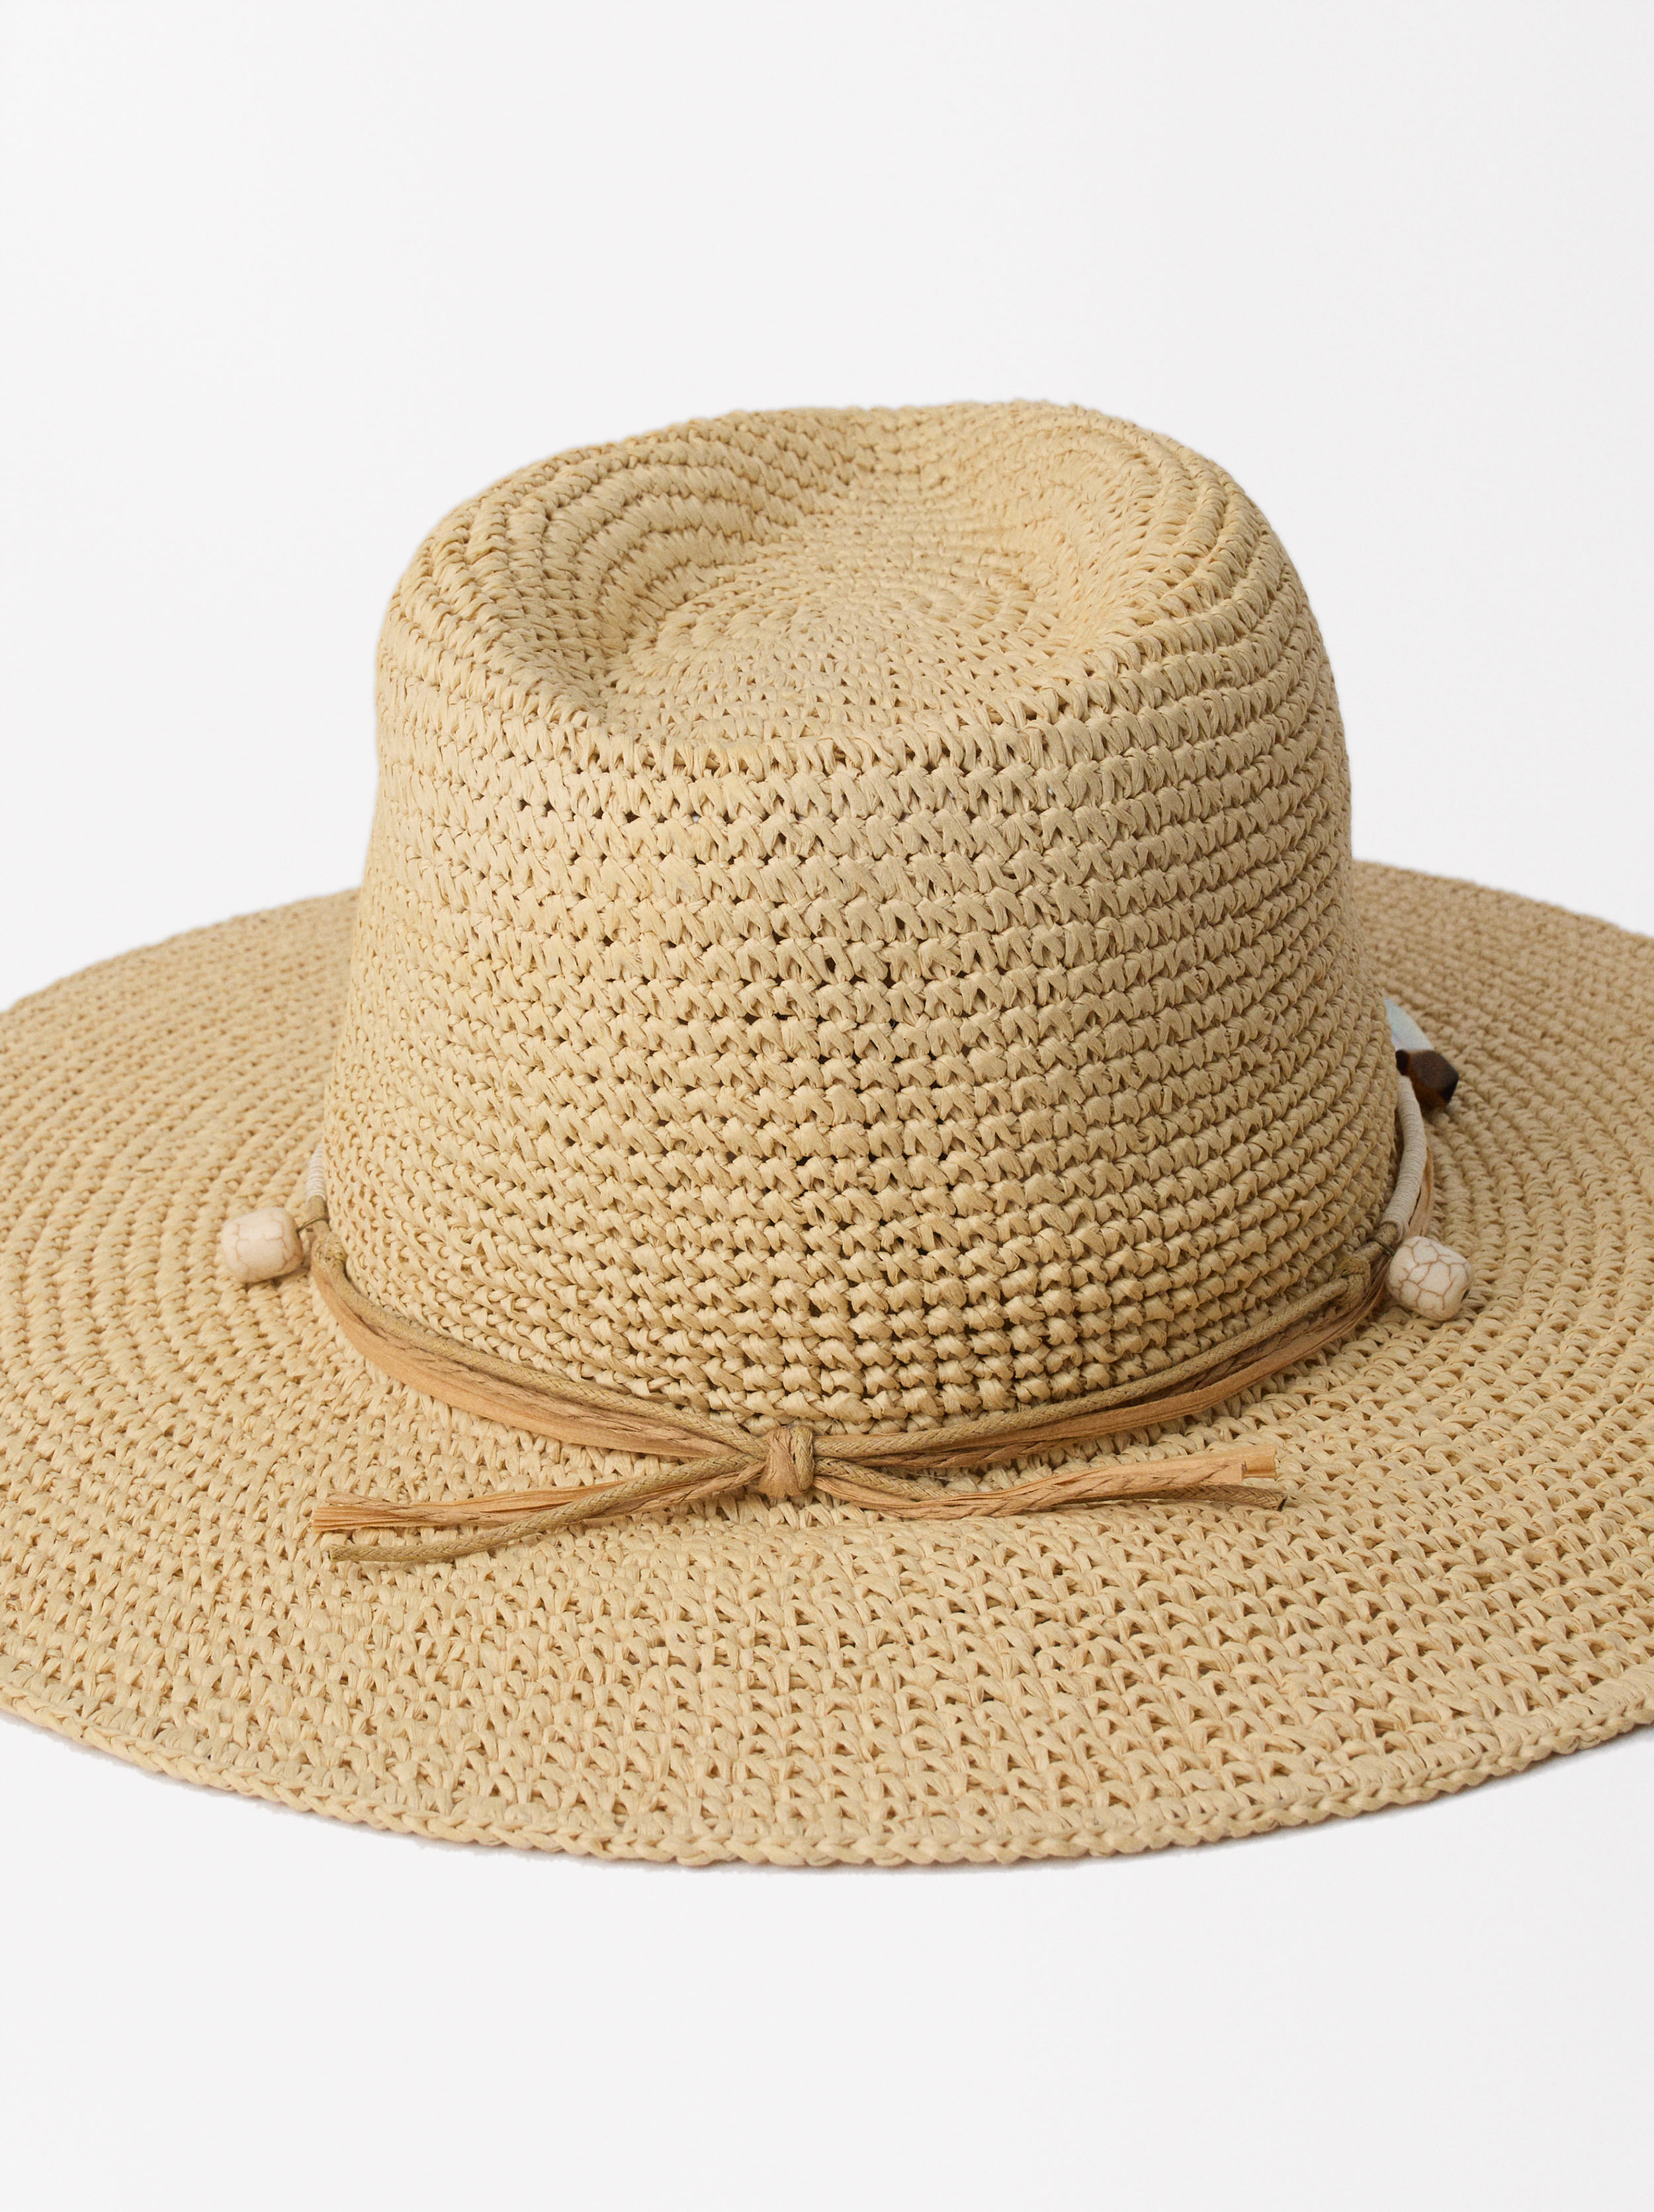 Straw-Effect Hat image number 1.0